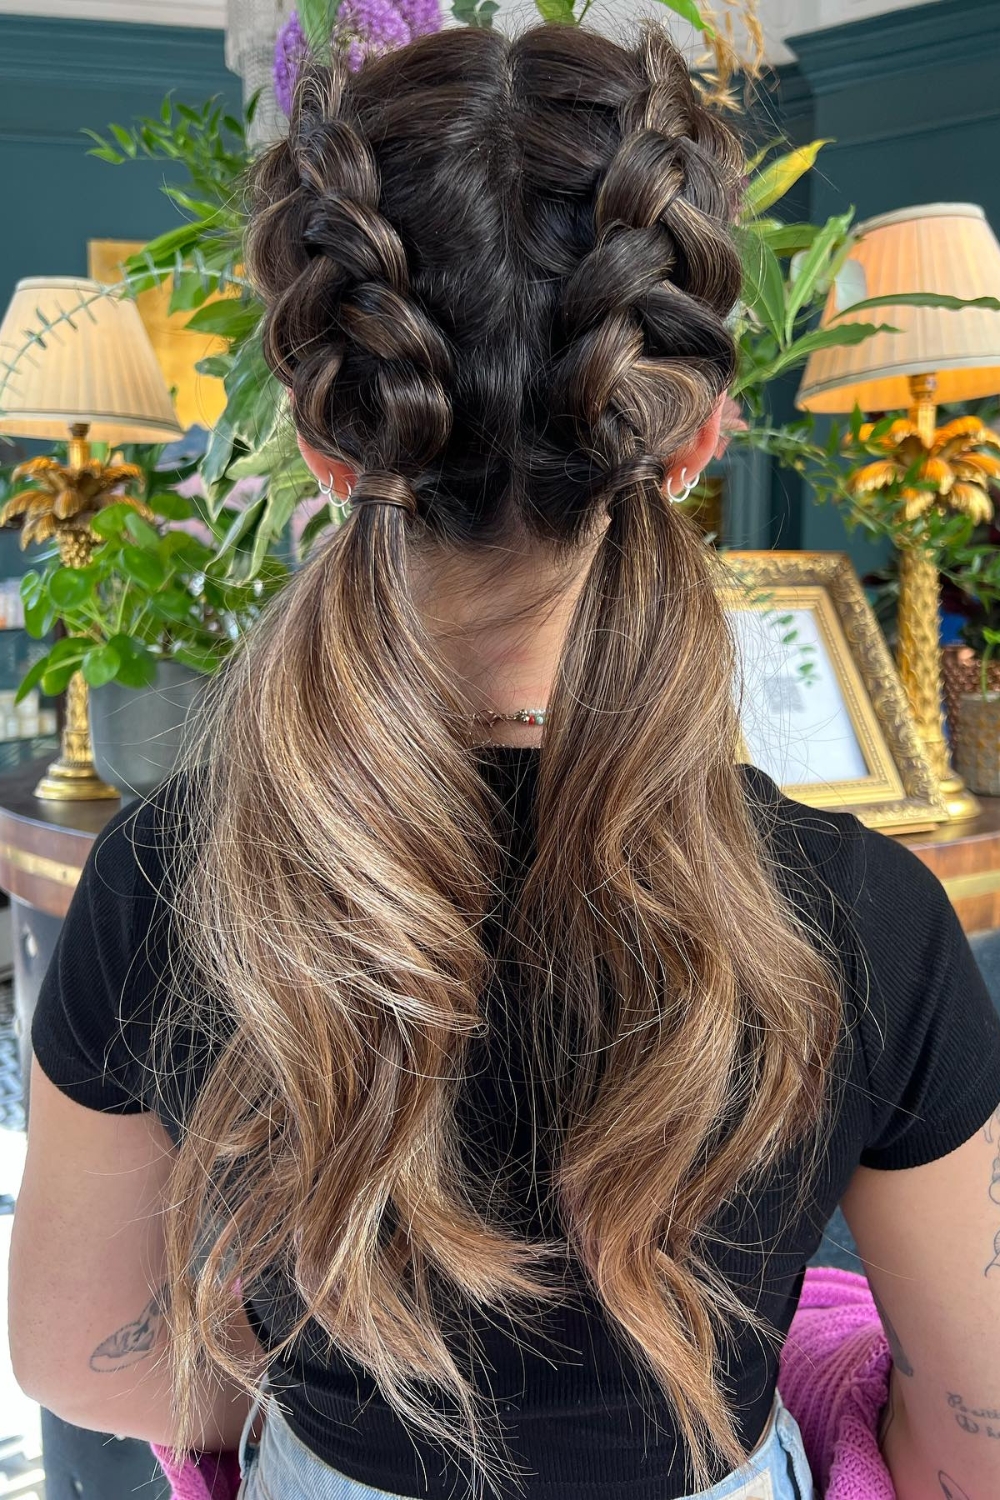 Double Braid Music festival Hairstyle